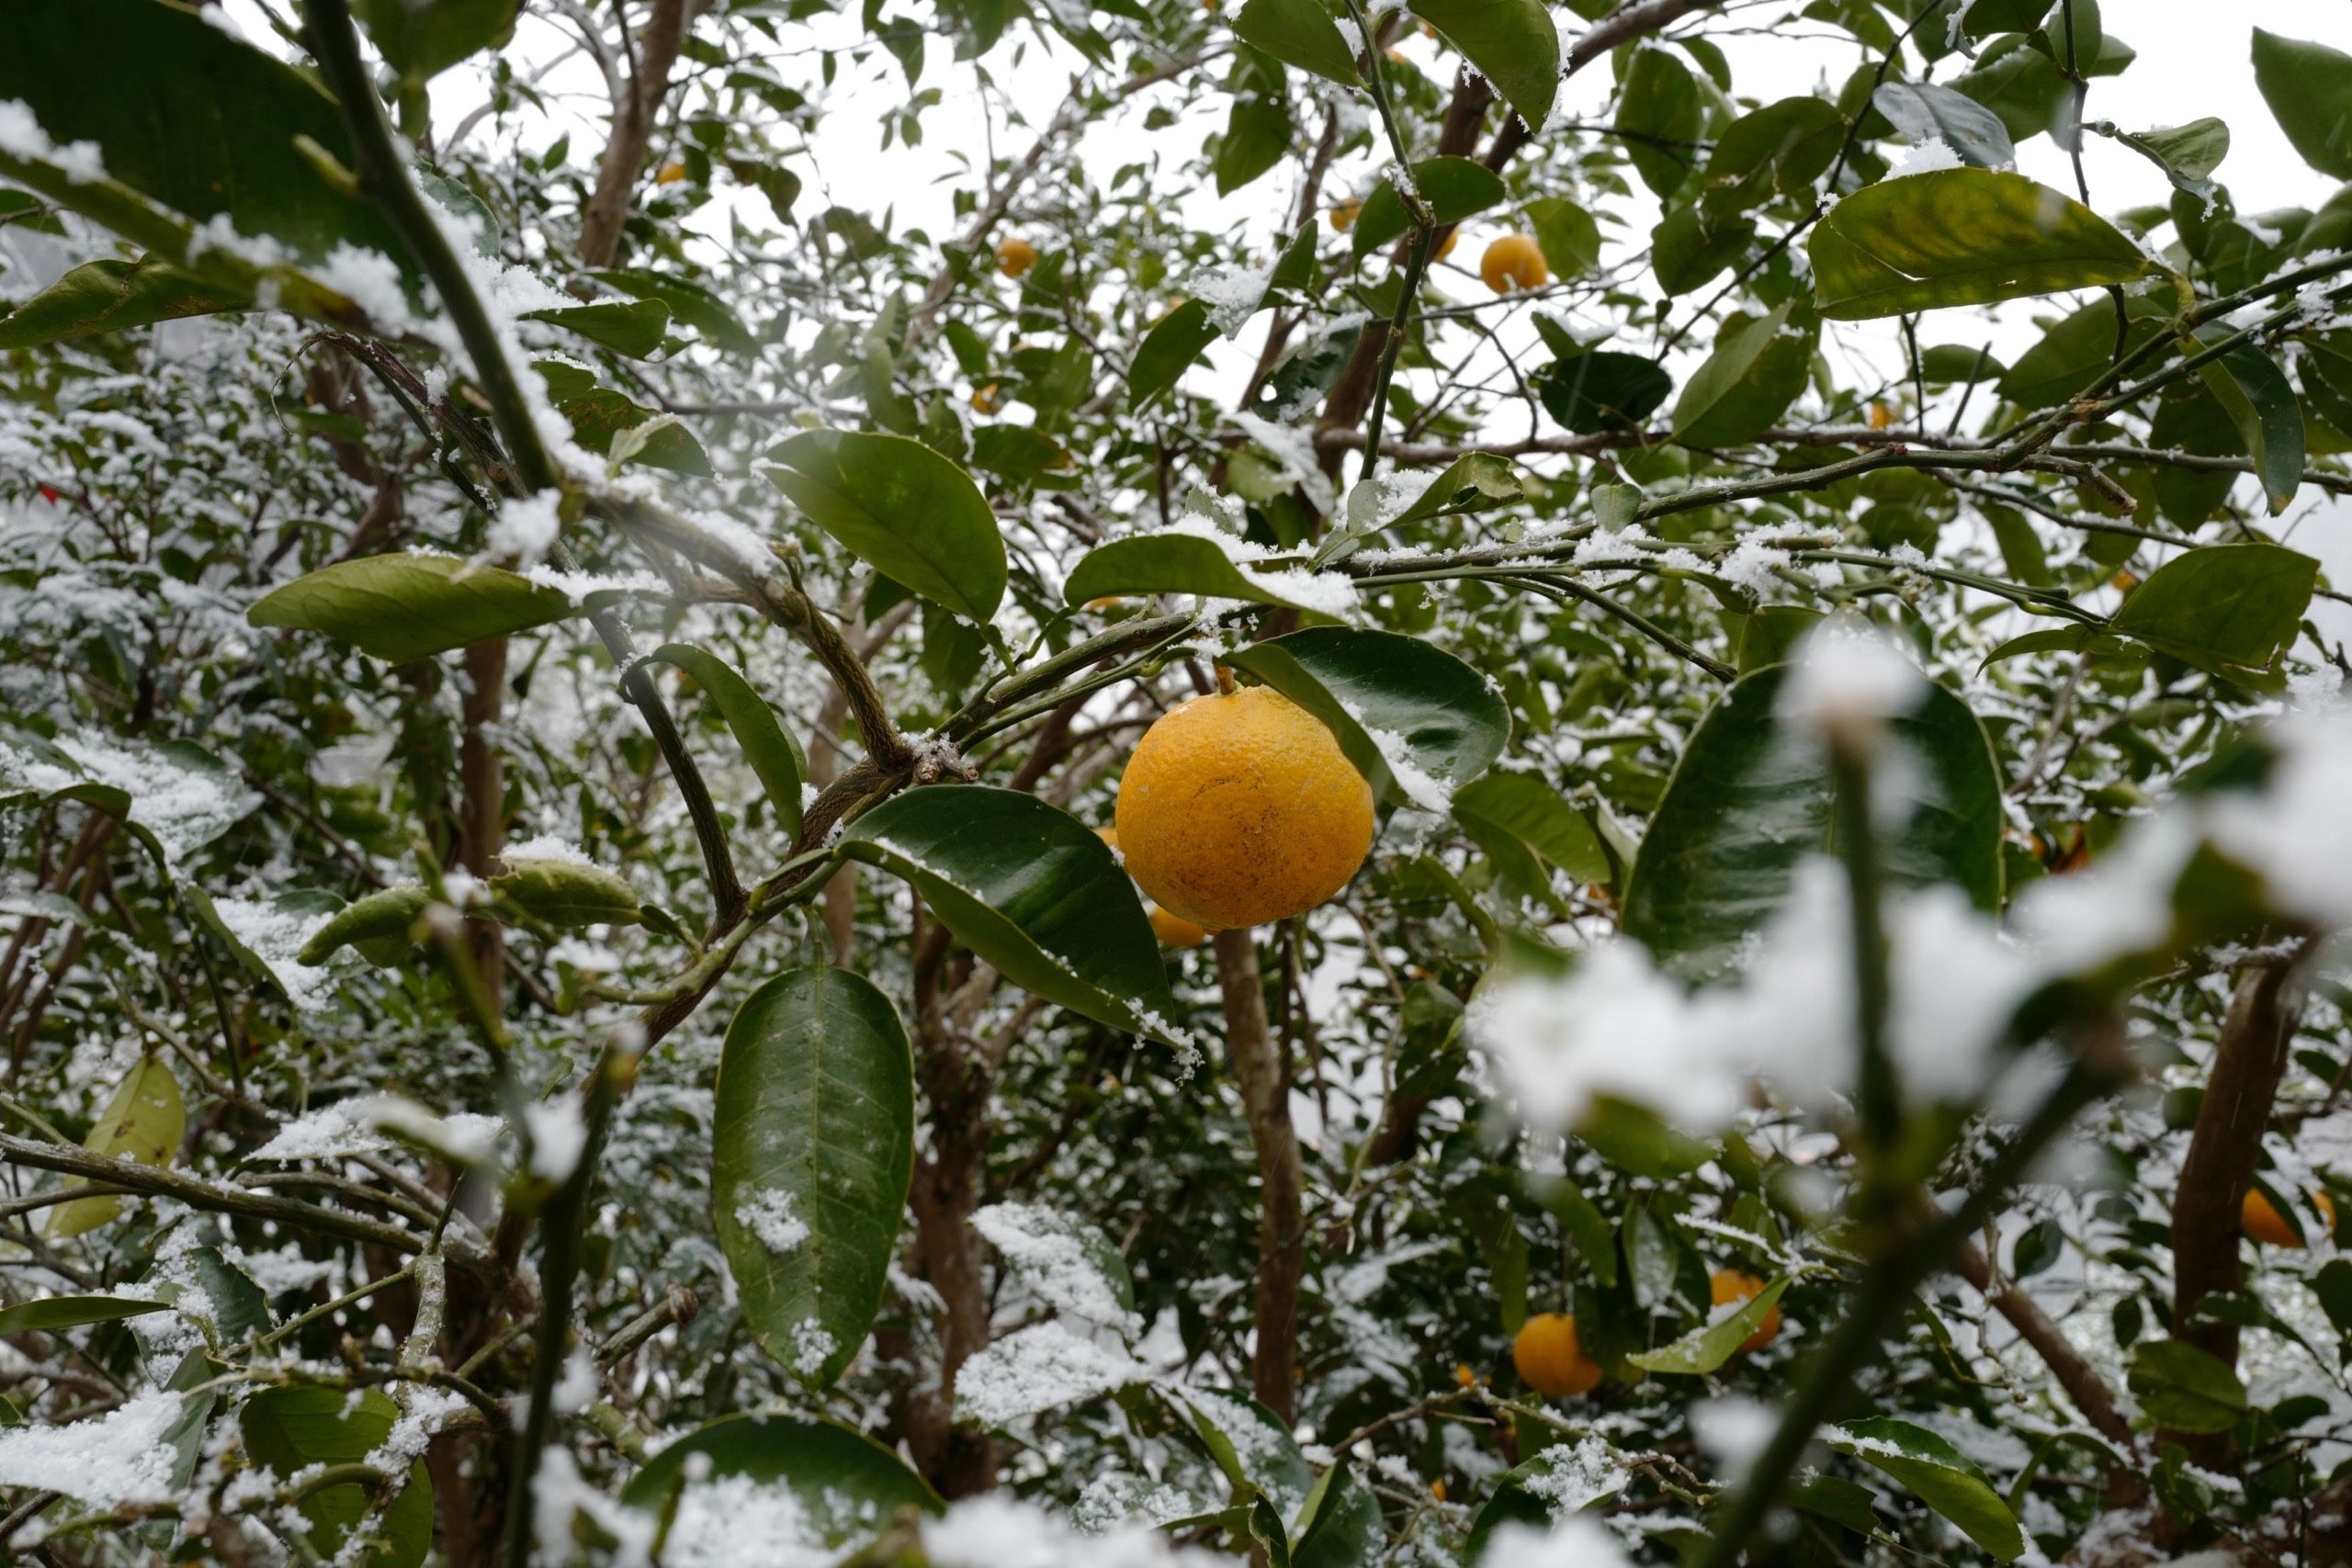 Closeup of a citrus fruit on a tree covered in snow.